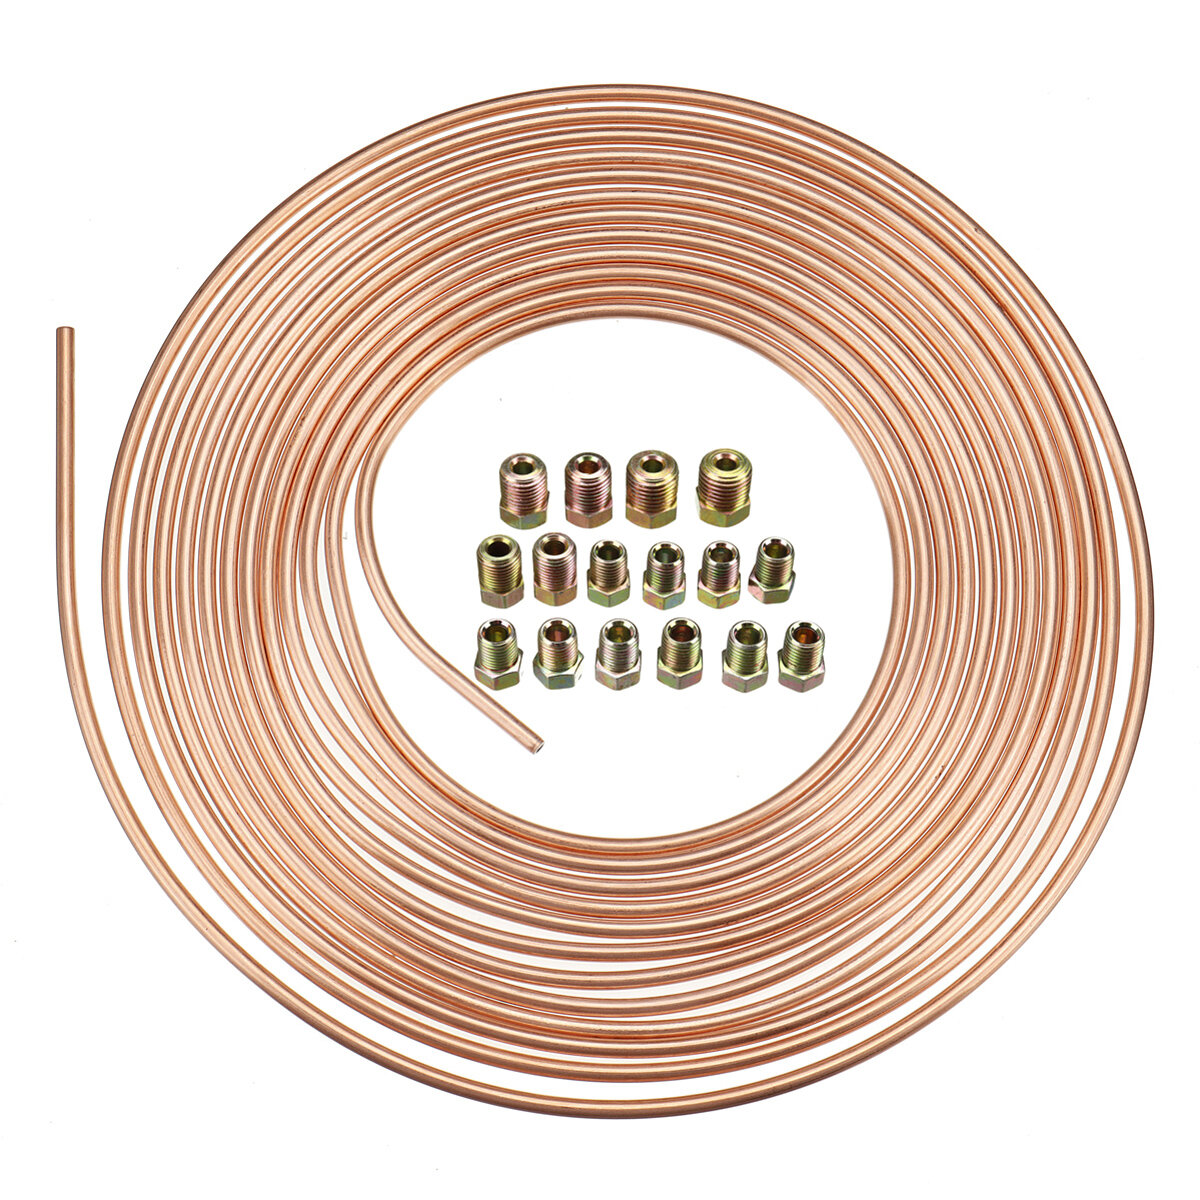 25ft?Roll?Coil?3/16?"OD?Koperen Auto Remleiding Tubing Kit with16Pcs Nuts Fittings